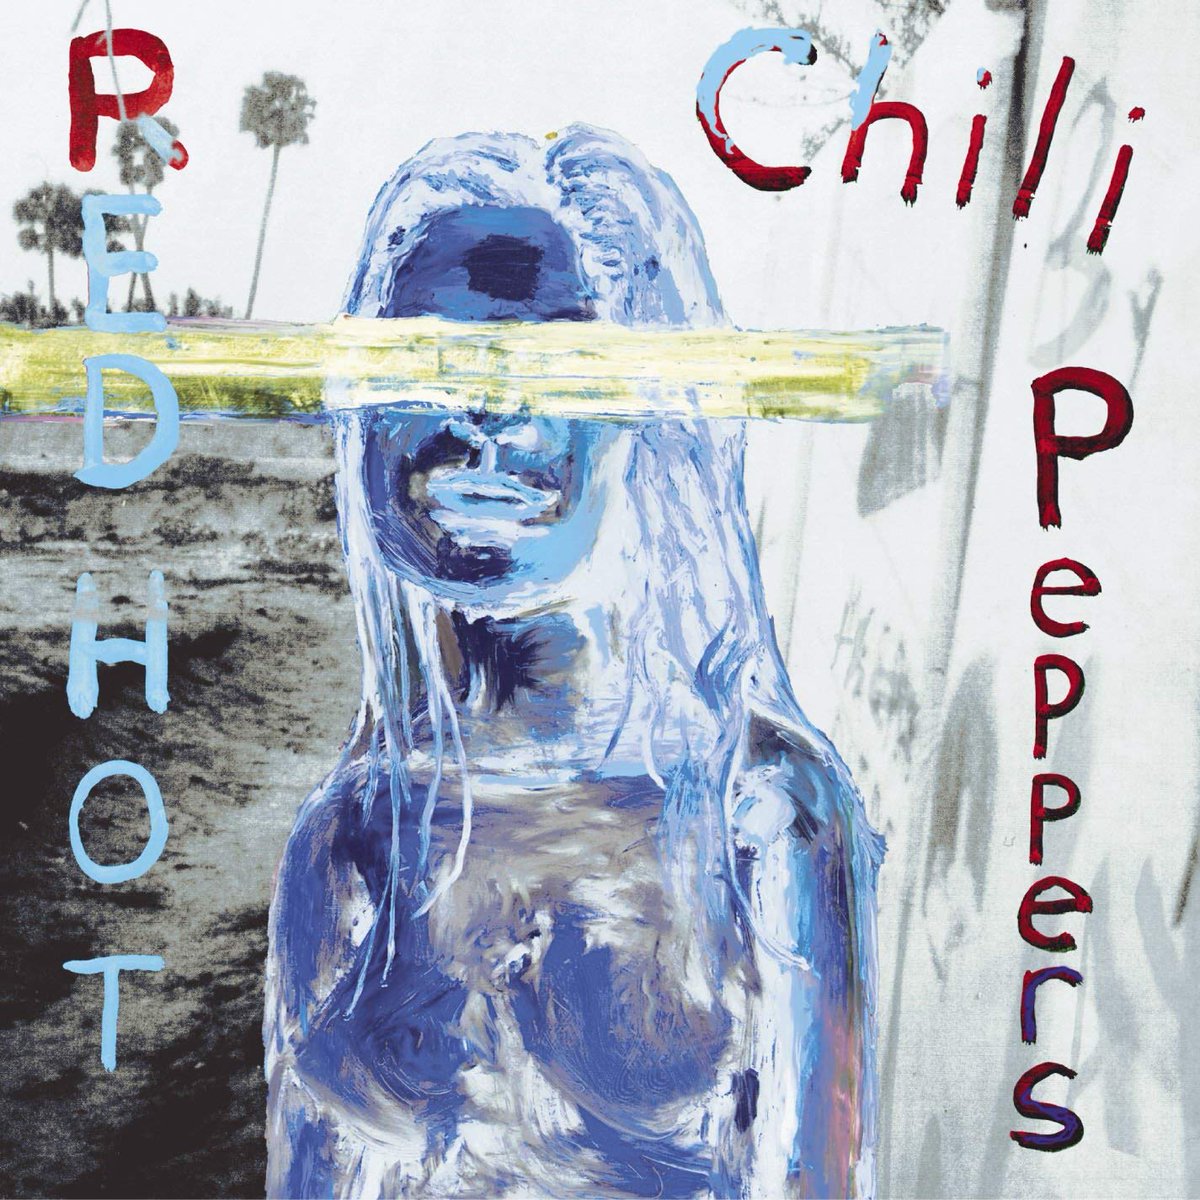 On this day in 2002, By The Way was released. Produced by Rick Rubin. Artwork by Julian Schnabel. 

What’s your favorite song on the album? Listen here: smarturl.it/RHCPByTheWay

#RHCP #ByTheWay